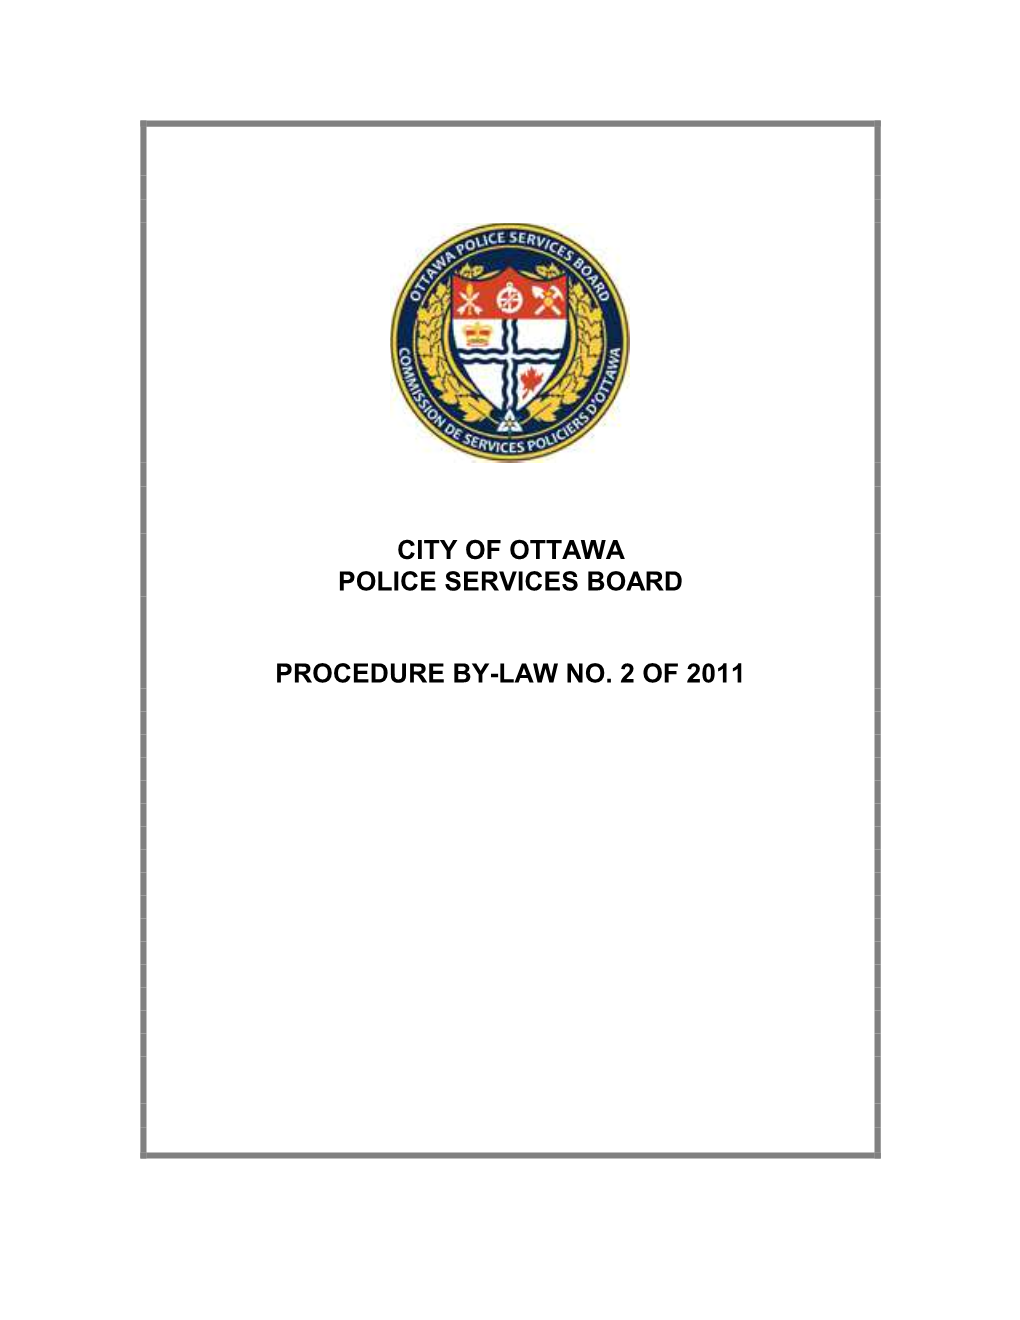 City of Ottawa Police Services Board Procedure By-Law No. 2 of 2011